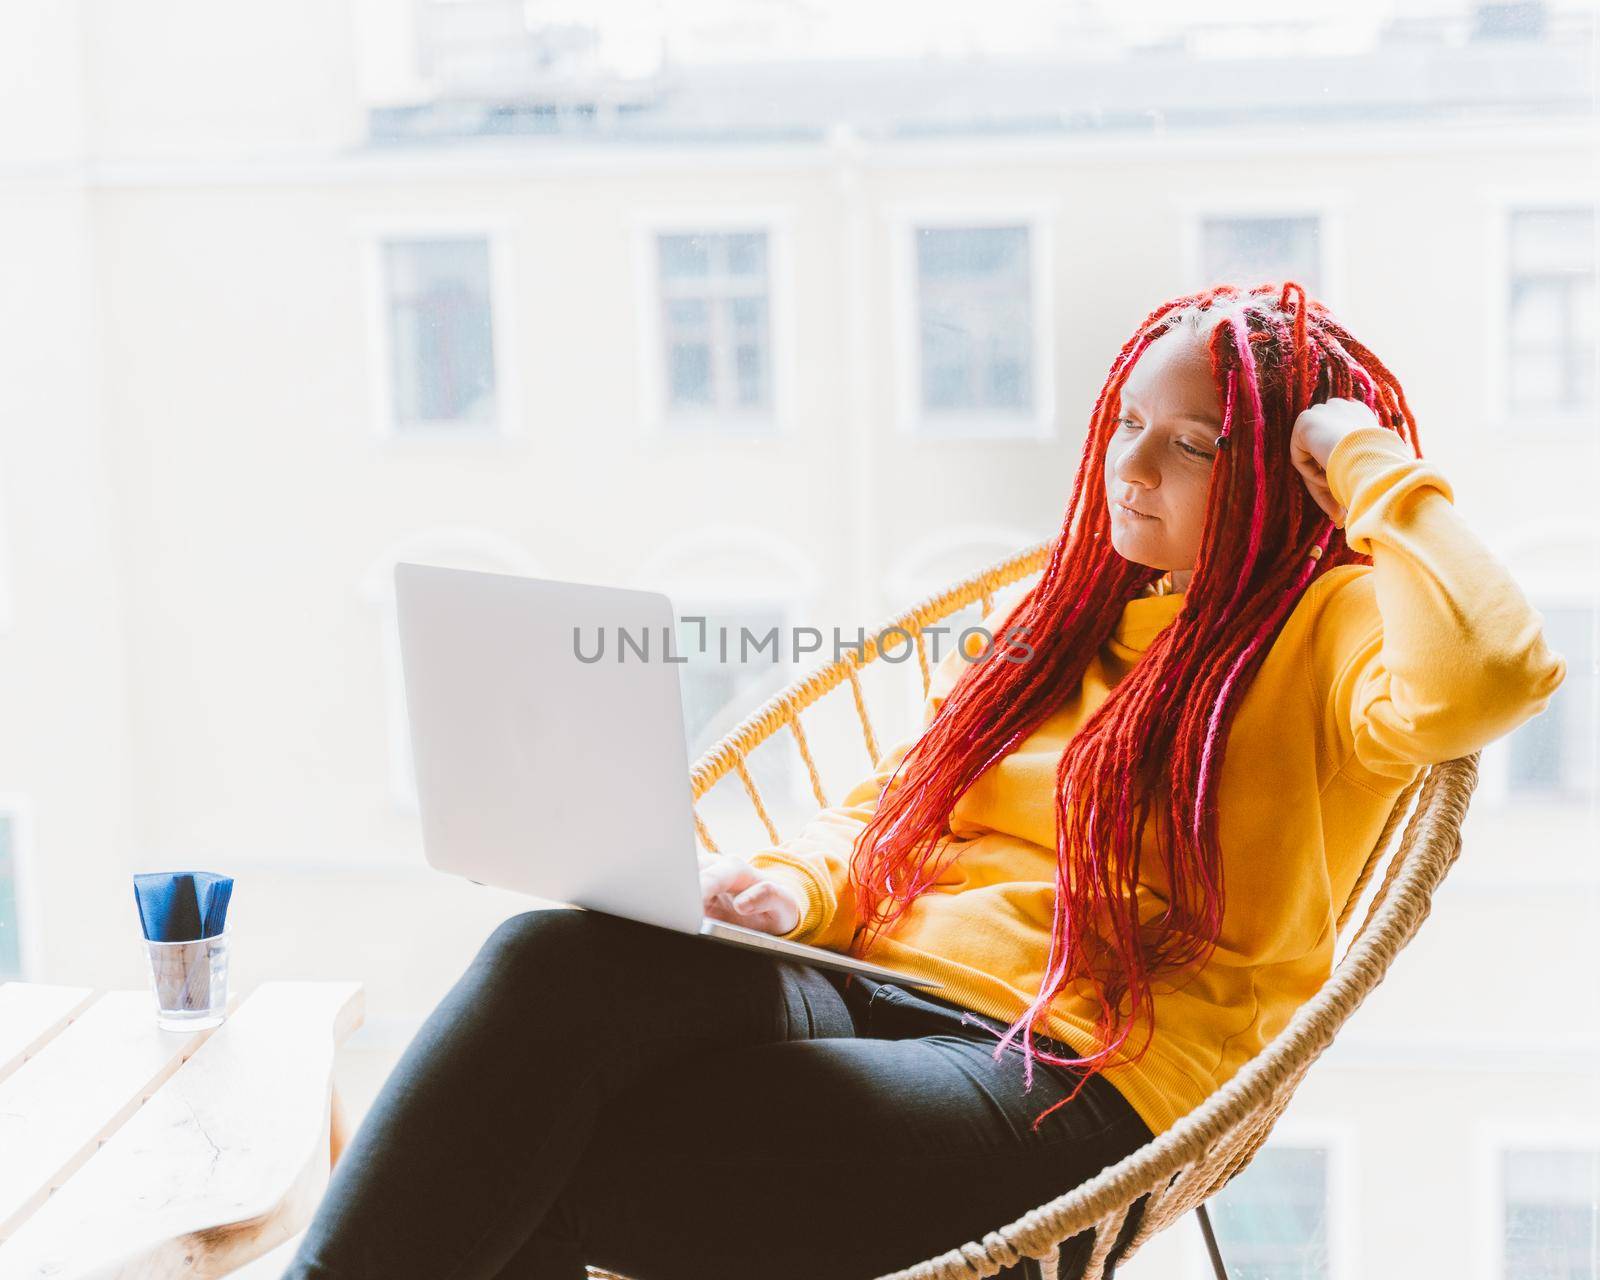 Digital nomad concept. Girl freelancer remotely working on a laptop in a cafe, coworking. Woman with long pink dreadlocks in an informal setting, in casual comfortable clothes sitting at chair